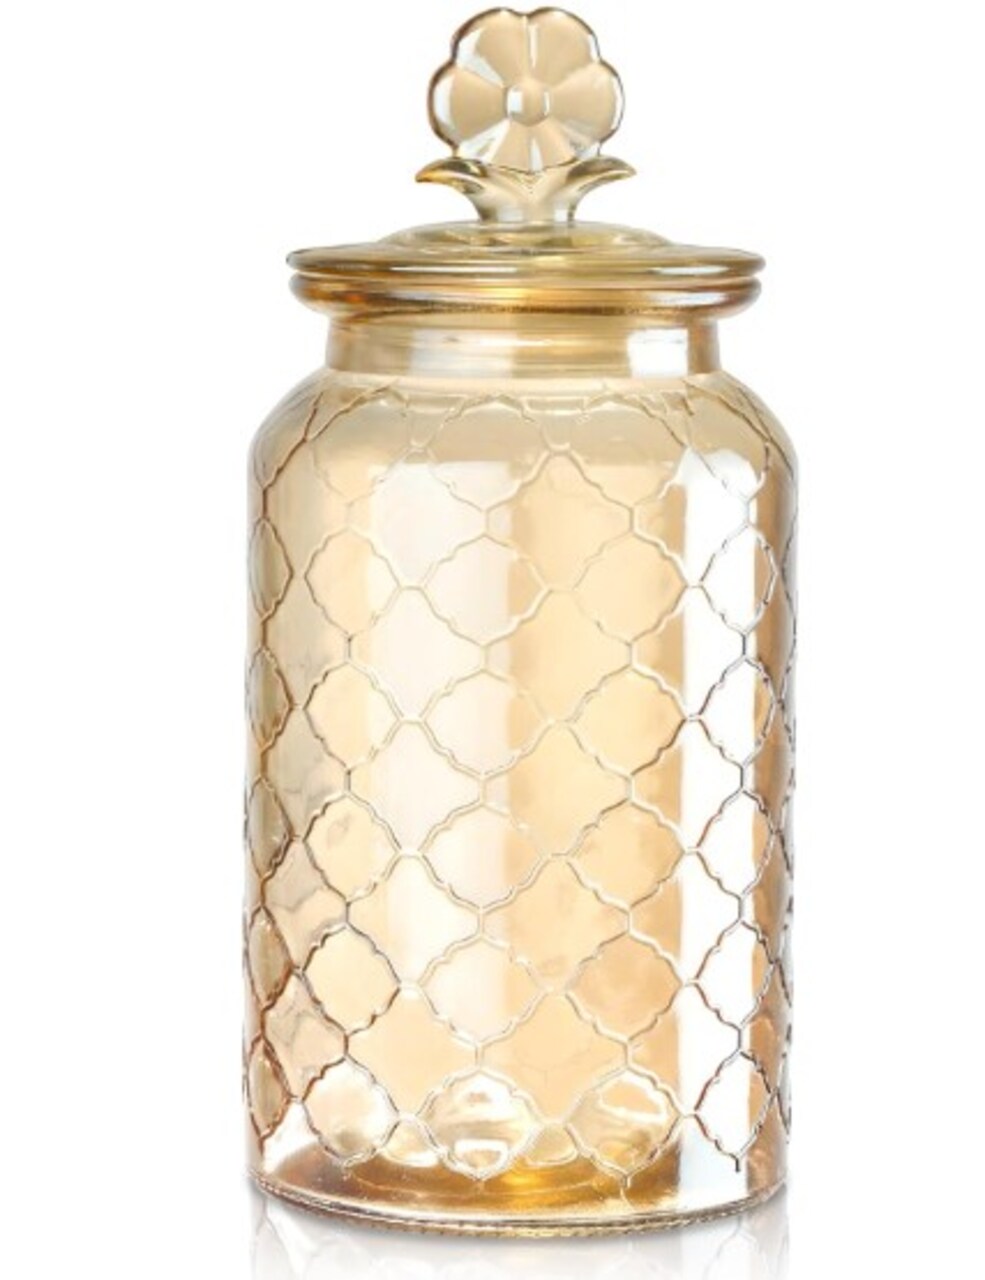 45 oz Amber Glass Storage Jar with Airtight Glass Lids,Vintage Embossed  Glass Food Container,Vintage Embossed Glass Food Container,Decorative  Kitchen Canister Organizer for Candy, Flour, Coffee Bean, Pet Treats